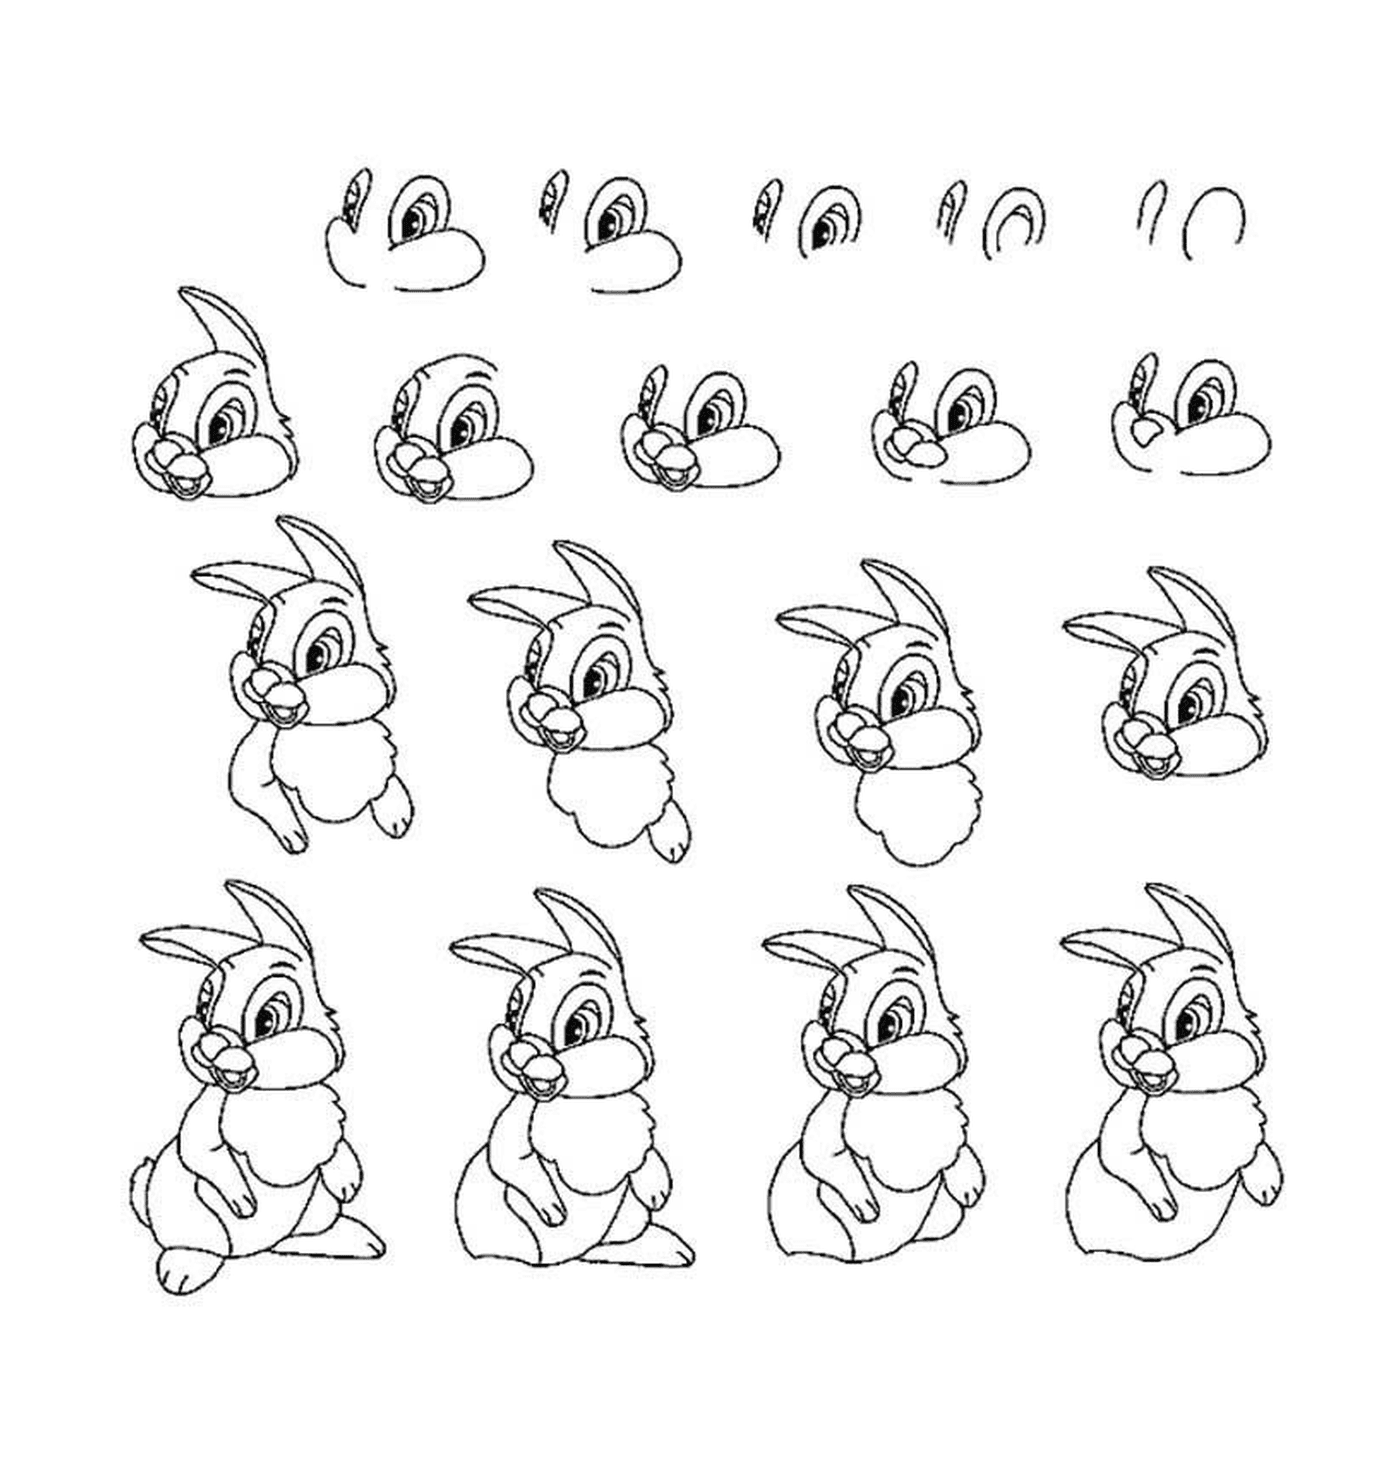  Different poses of a rabbit 